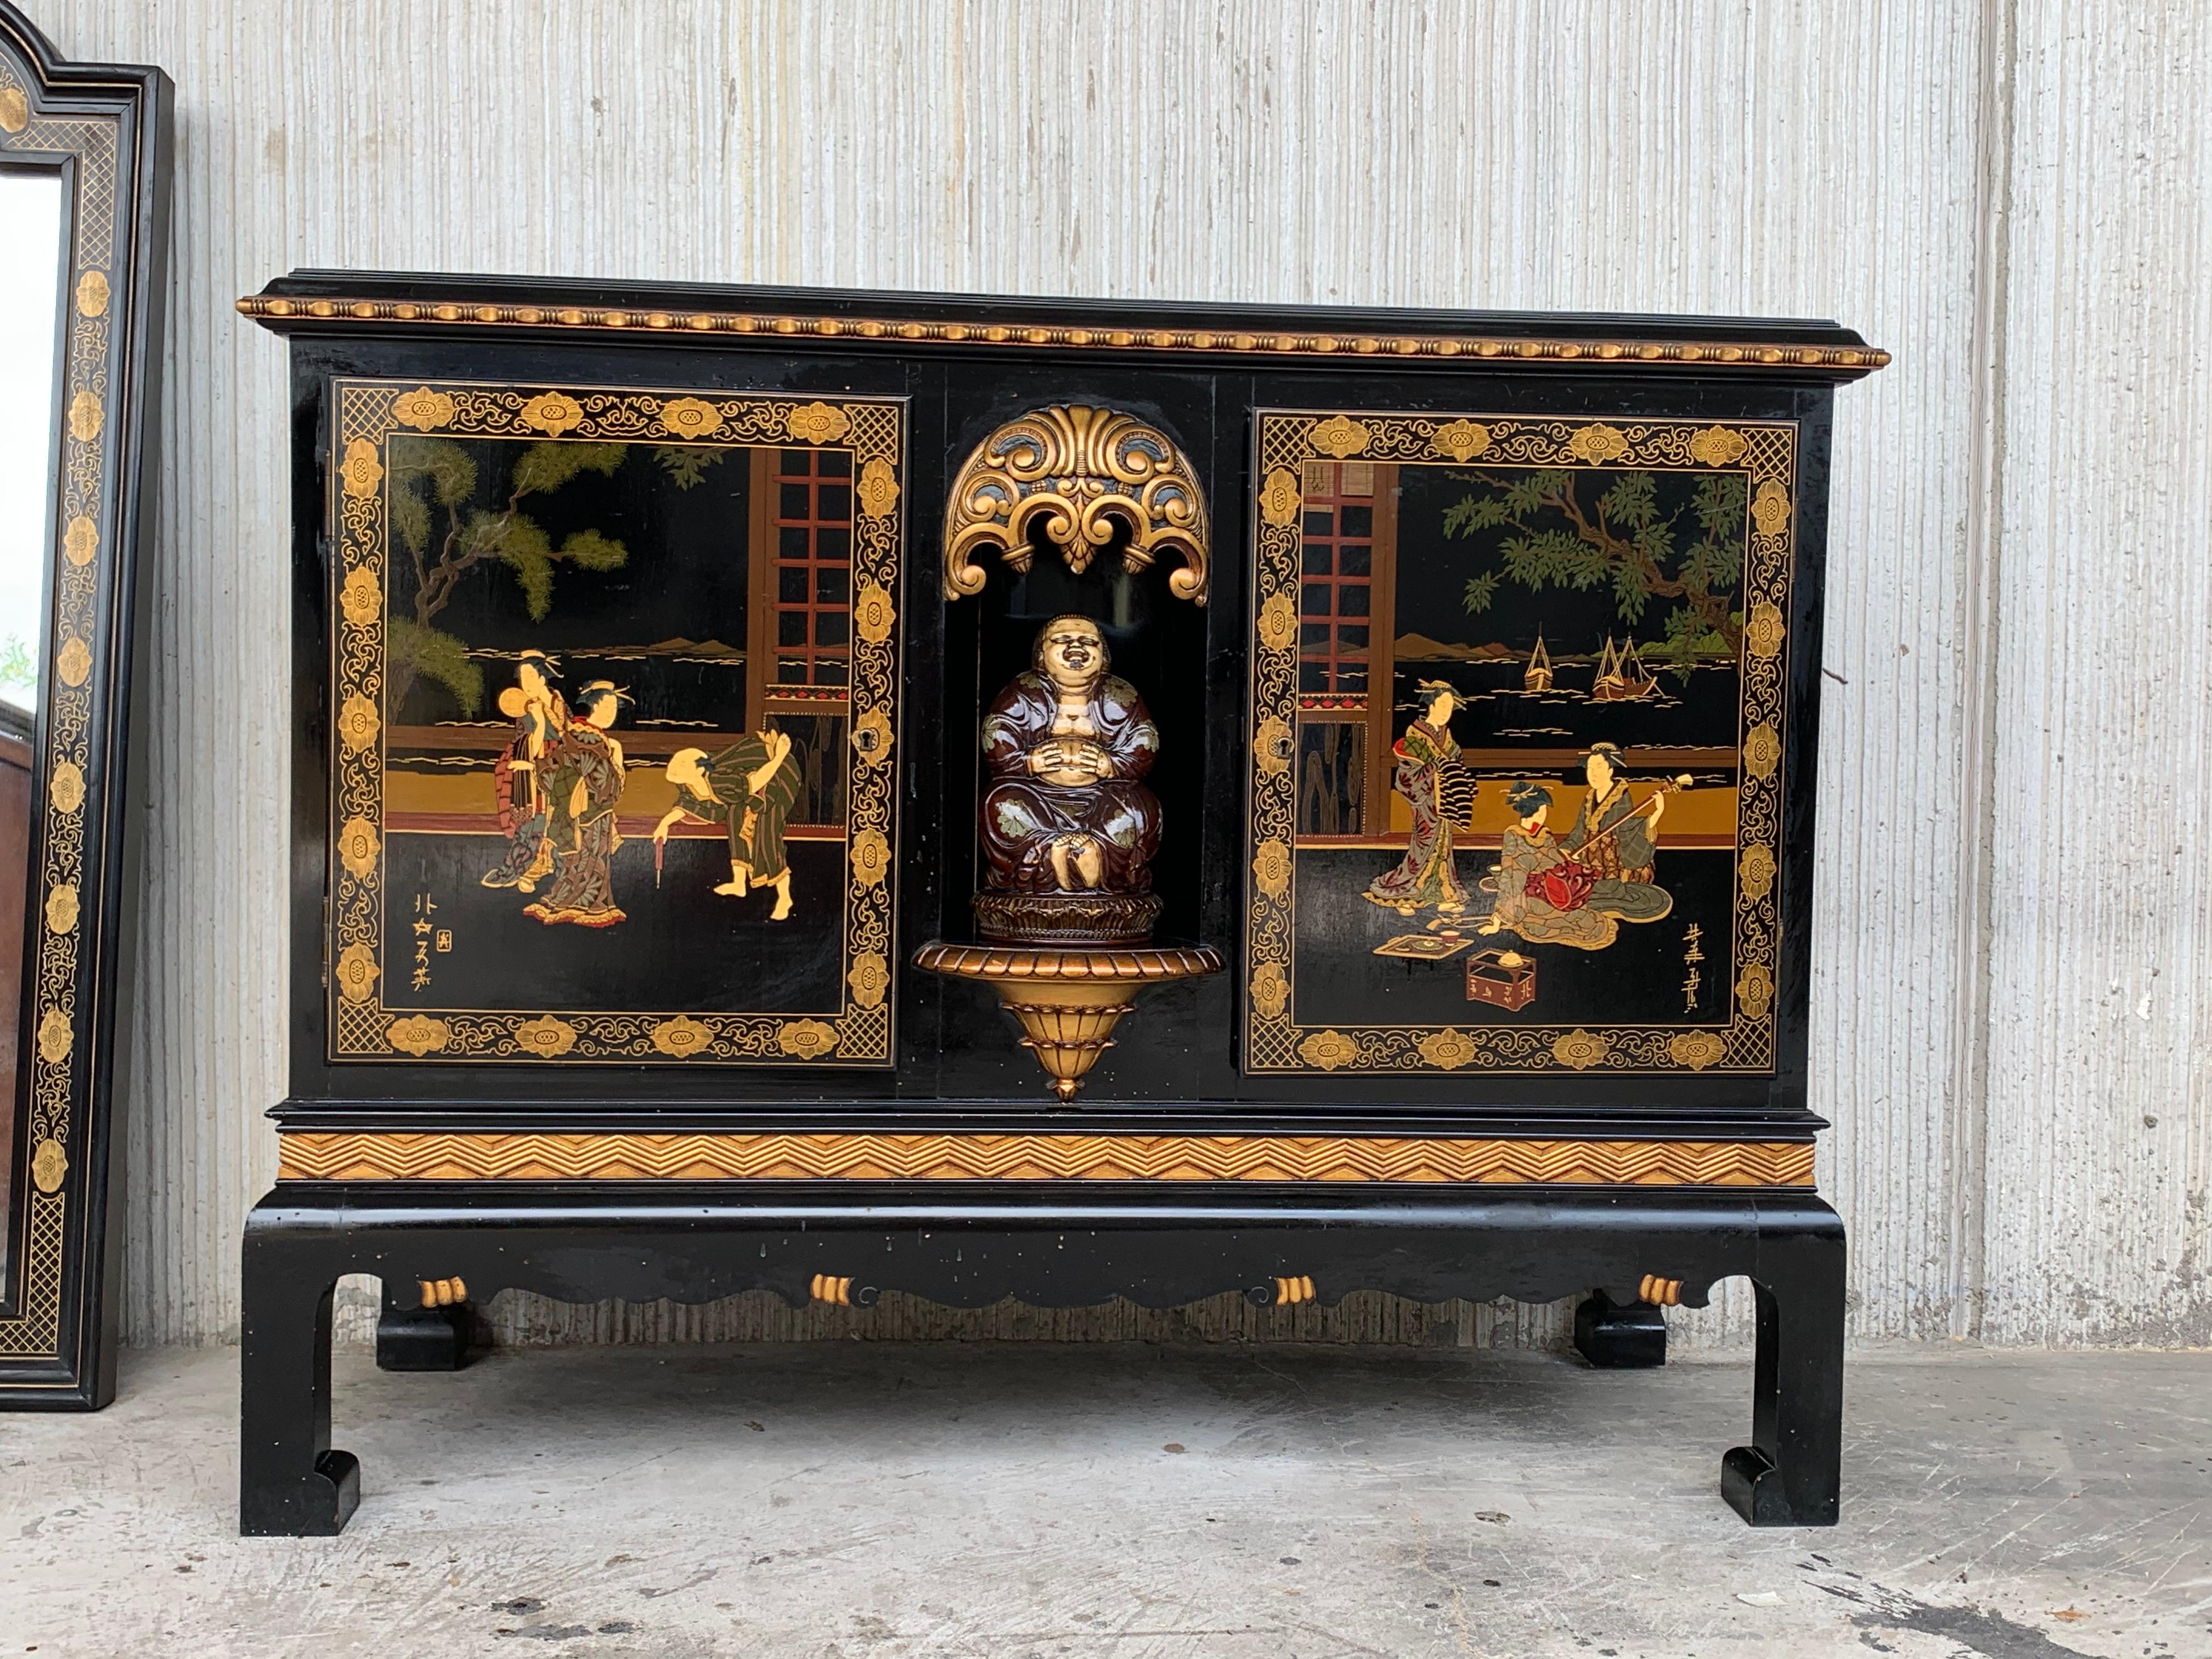 This incomparable chinoiserie black lacquer sideboard depicts figures in various typical traditional scenes. What more can you ask for really? As if that's not enough, there's plenty of traditional hand painted Asian motif from head to toe. The reds